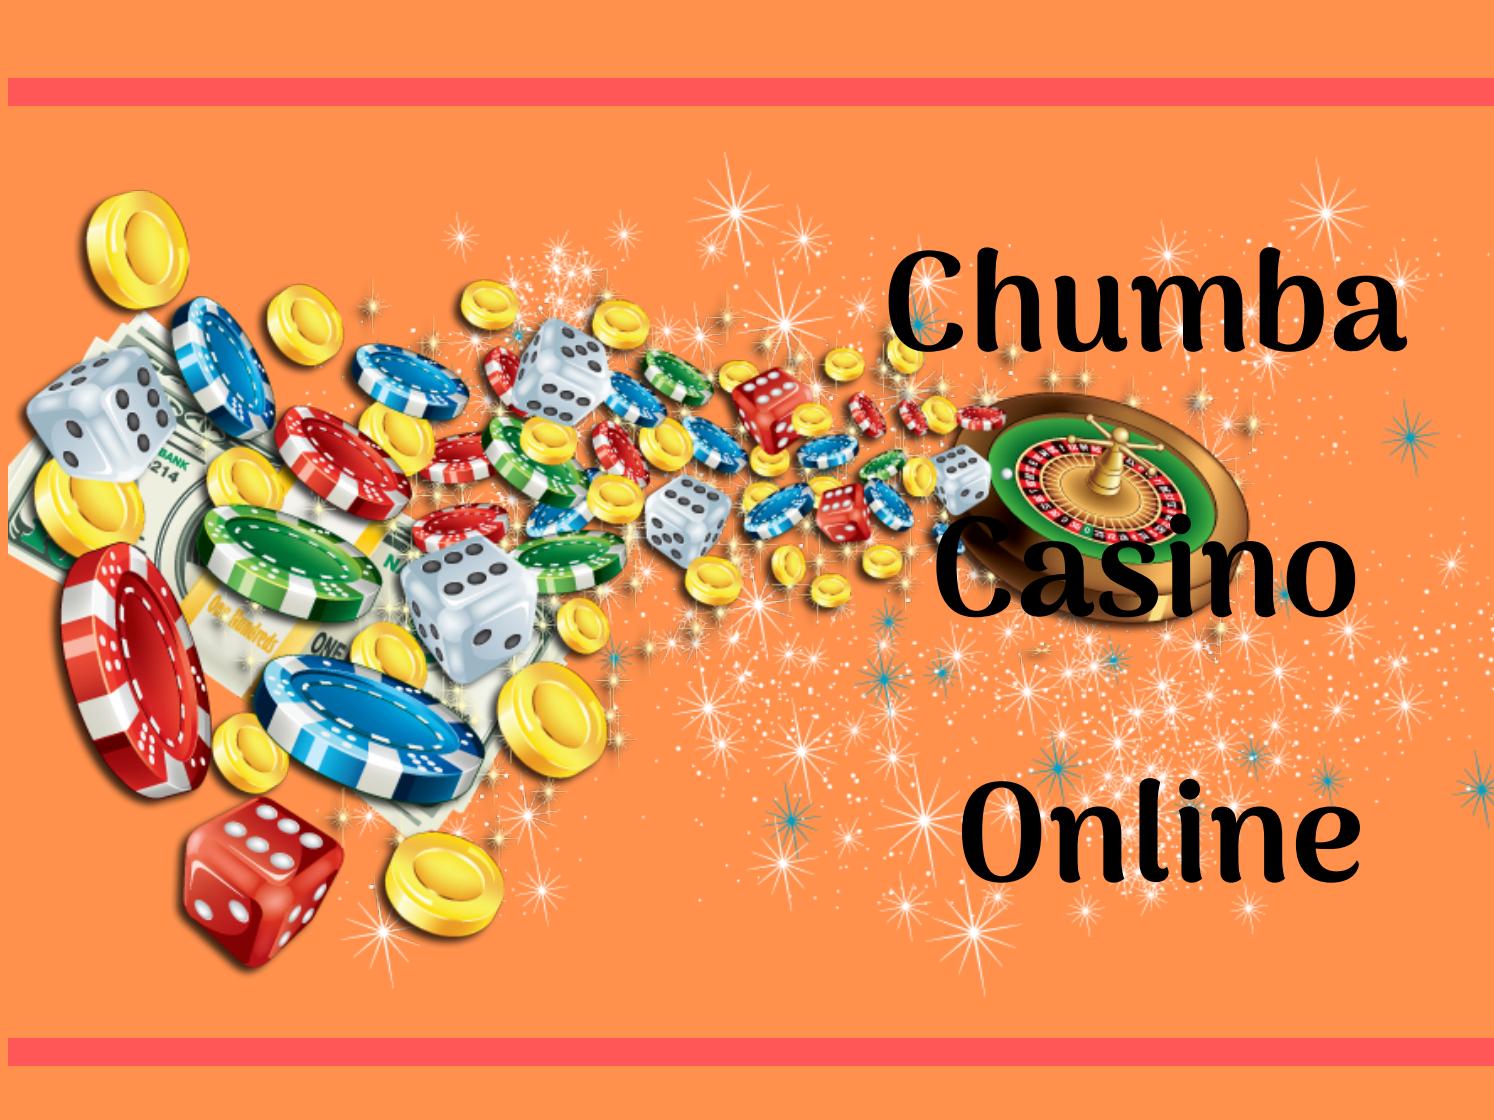 Chumba casino official site